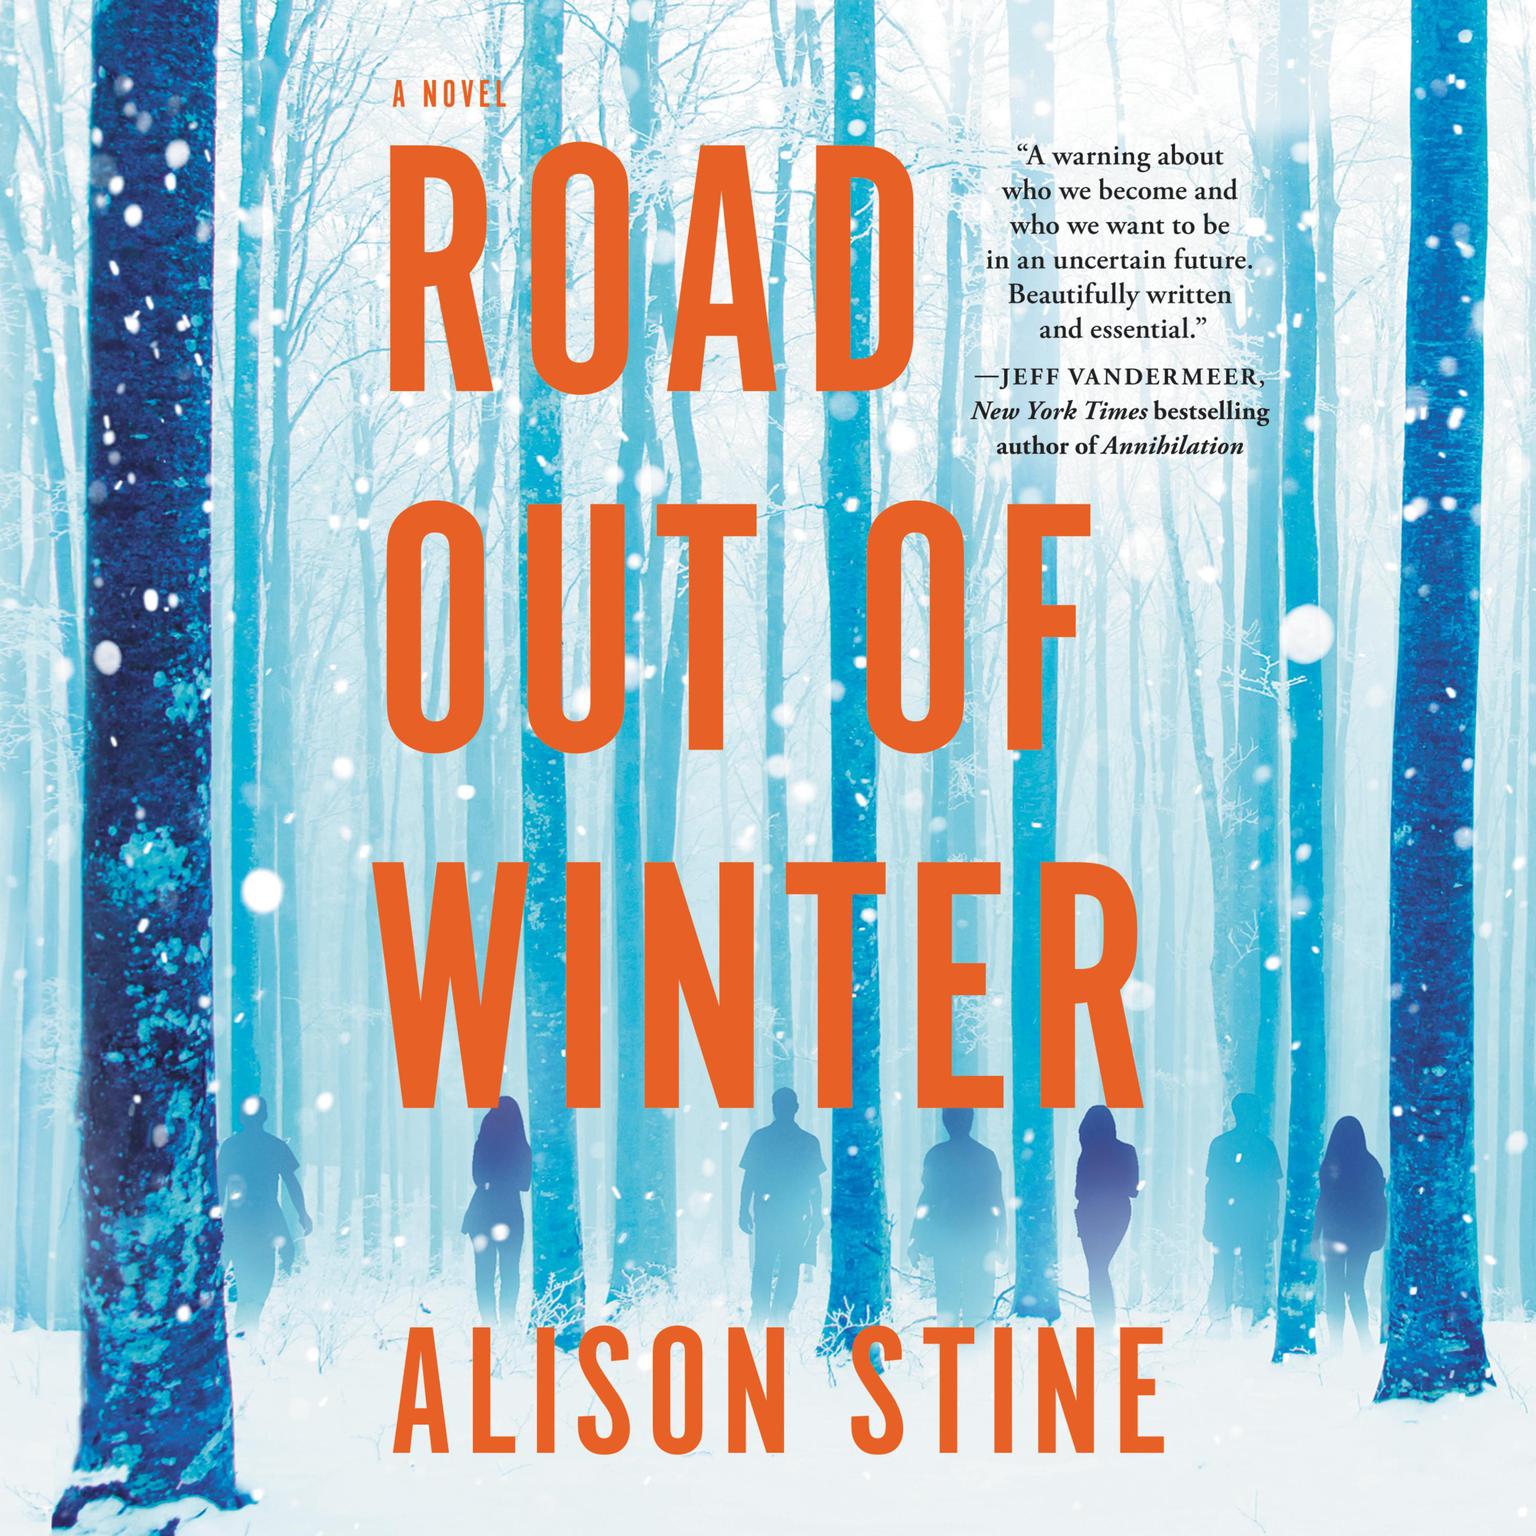 Road Out of Winter Audiobook, by Alison Stine